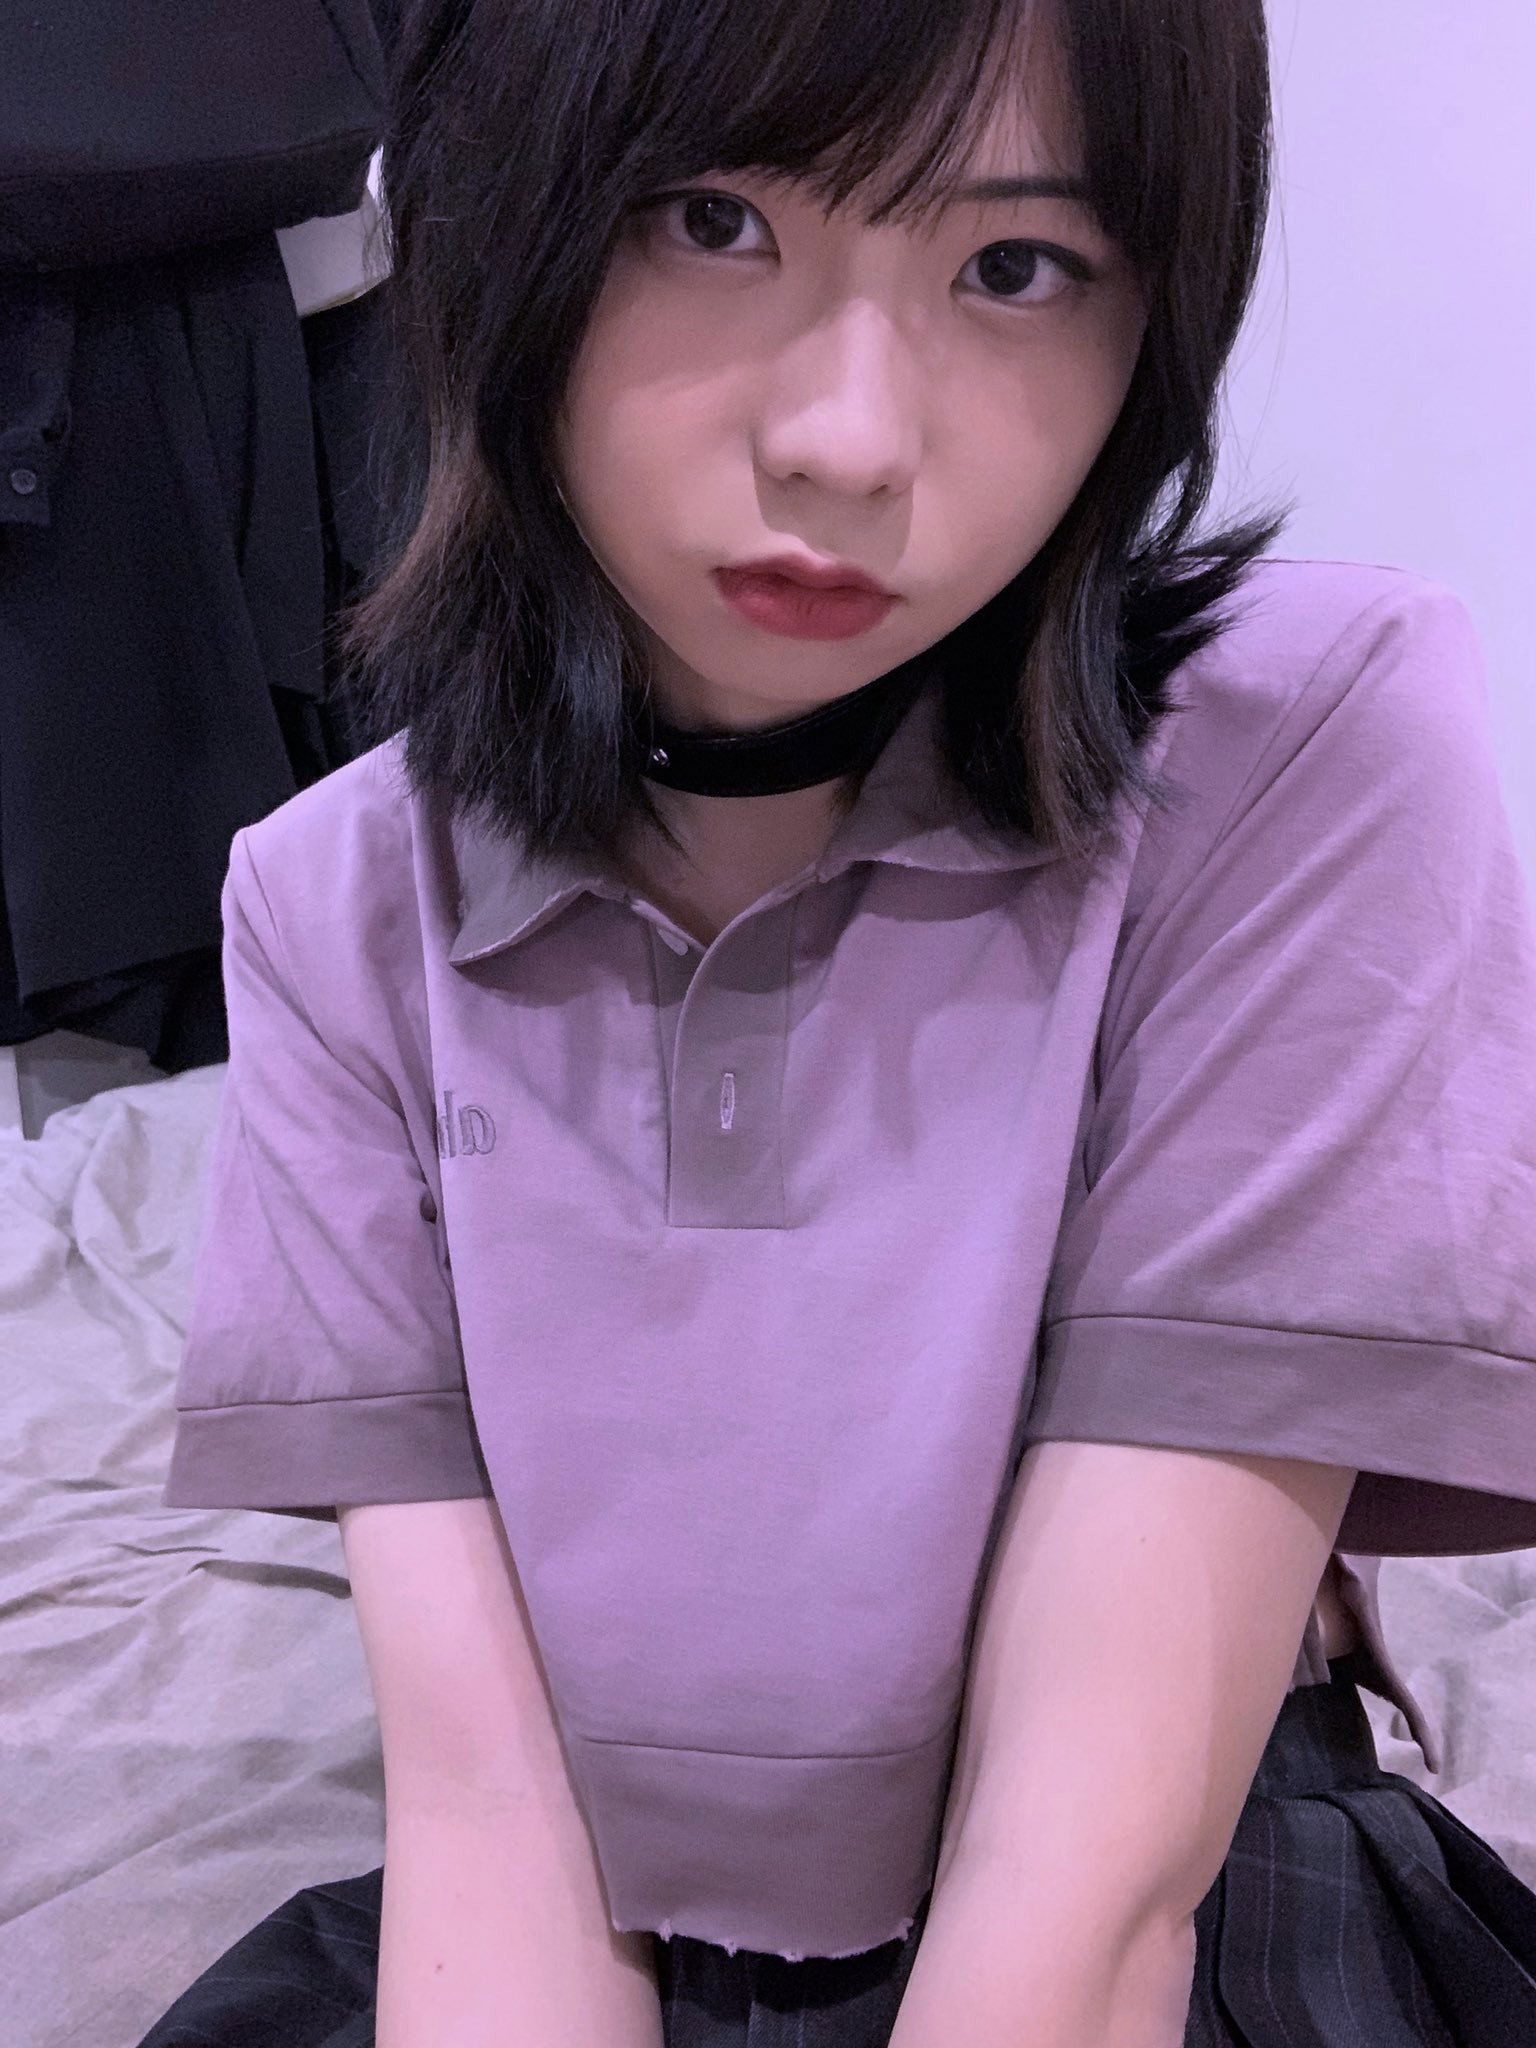 Photo by romaintranquille with the username @romaintranquille,  May 31, 2022 at 11:22 PM. The post is about the topic Chinese crossdressers and the text says 'Her Twitter username is meizaijiang #ChineseCD #AsianCD #Crossdresser'